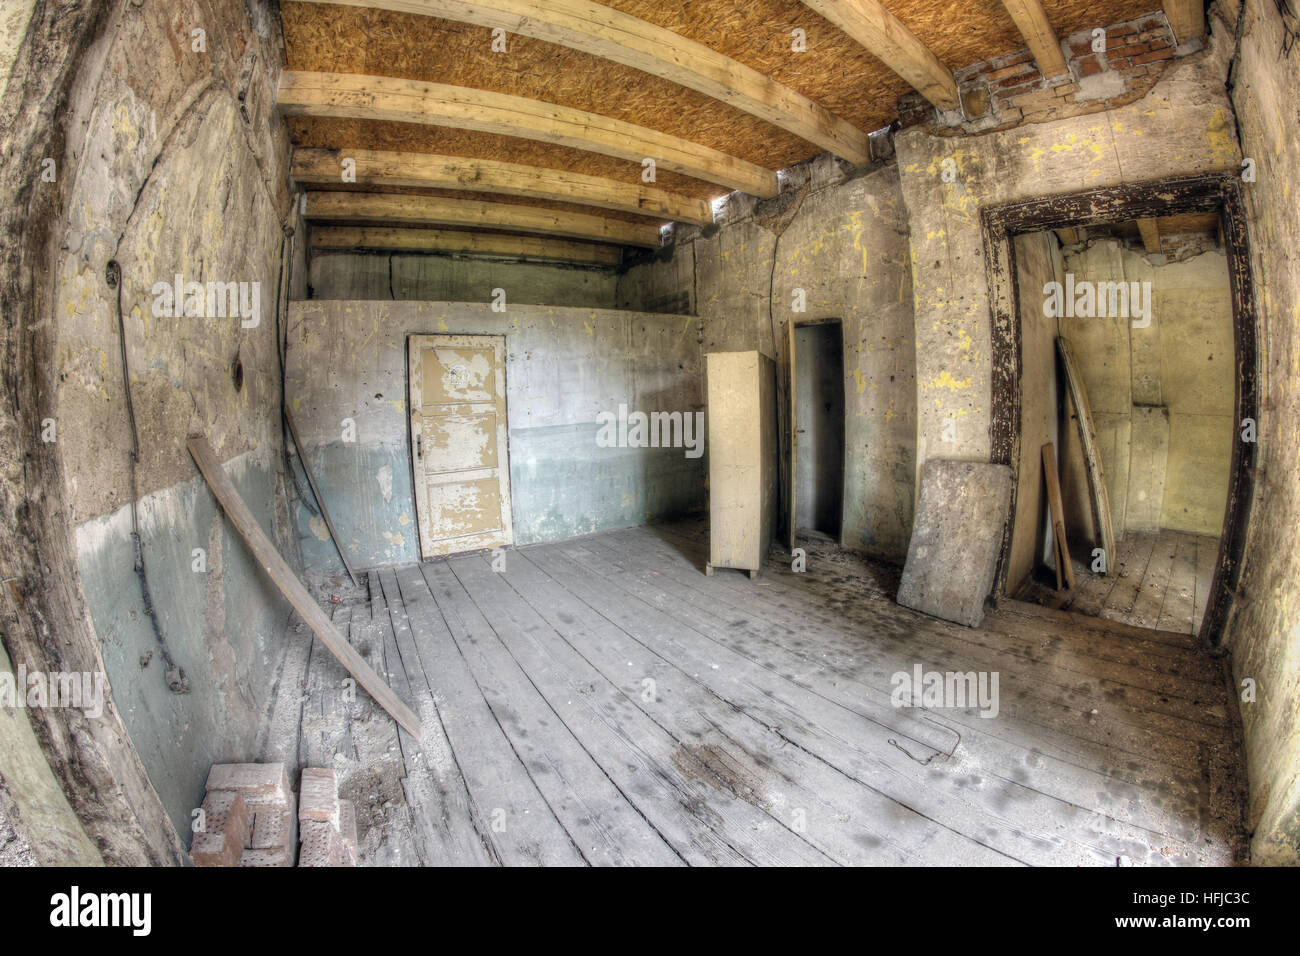 Ruins of the building in dilapidated condition Stock Photo